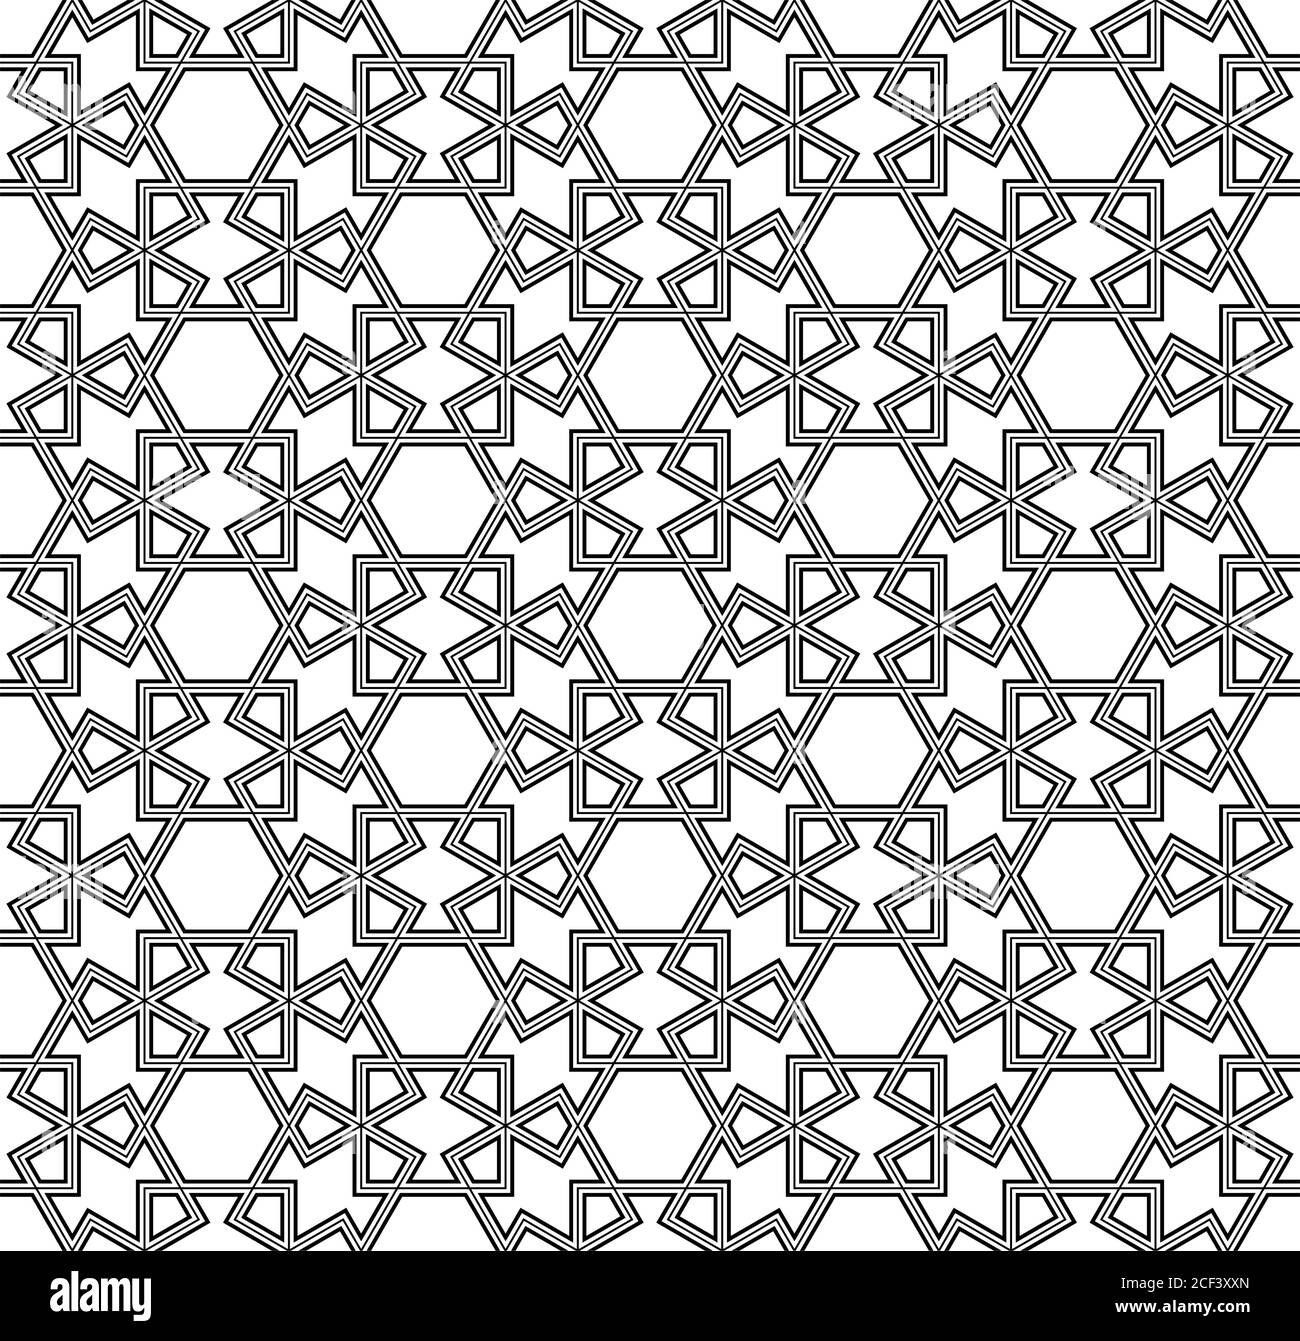 Seamless geometric ornament based on traditional islamic art.Black lines.Great design for fabric,textile,cover,wrapping paper,background,laser cutting Stock Vector